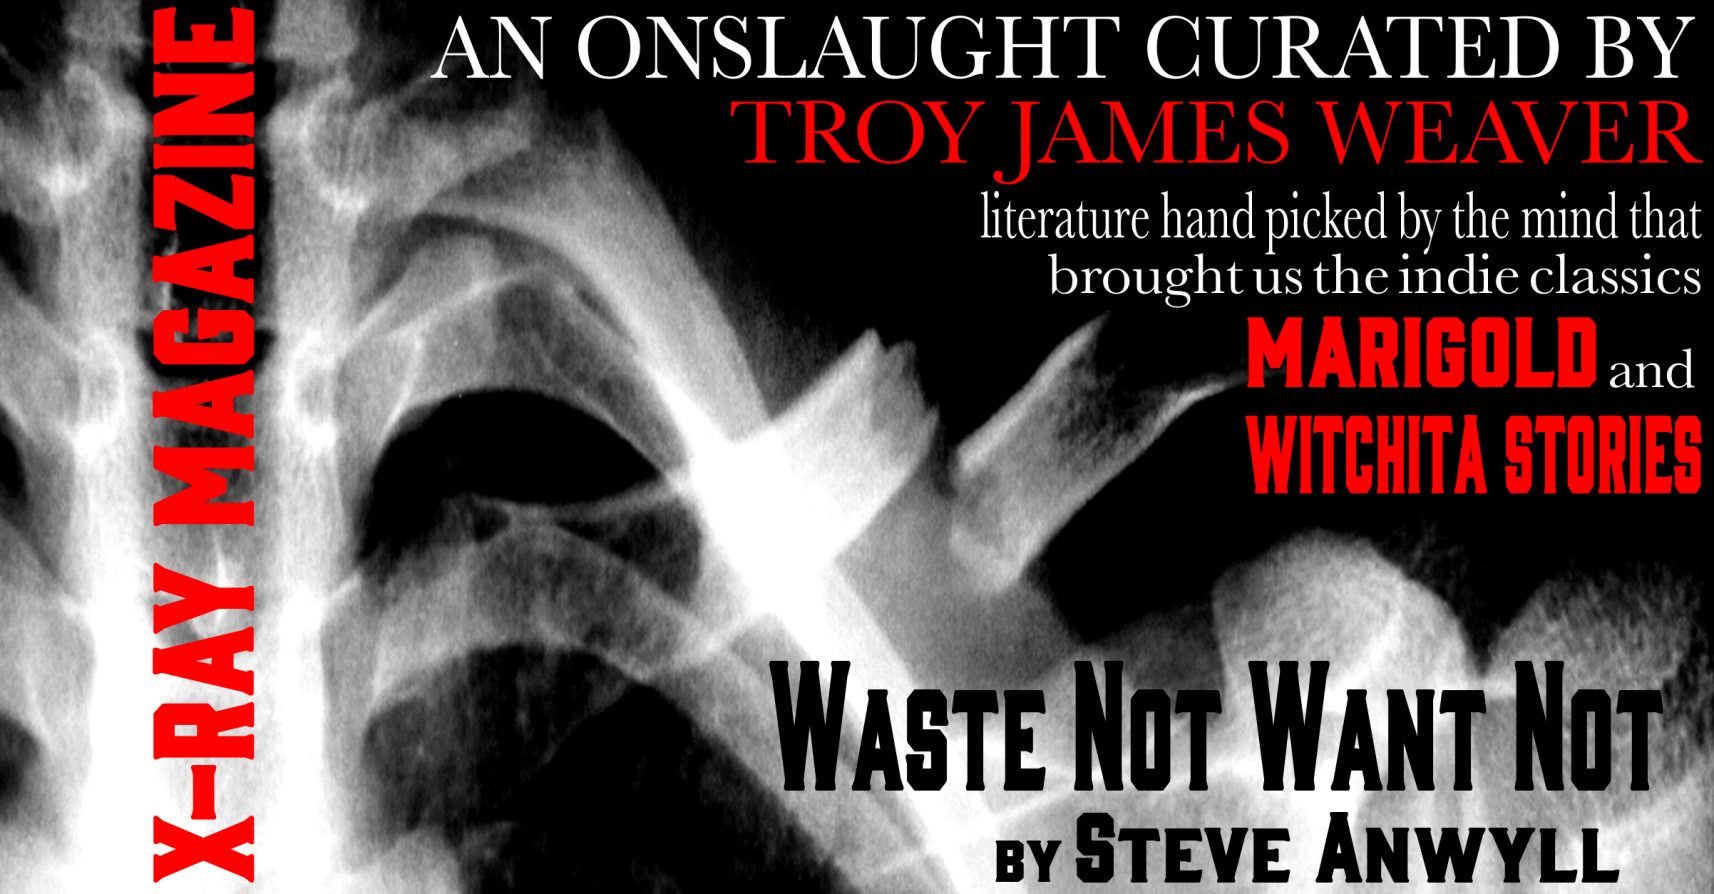 WASTE NOT WANT NOT by Steve Anwyll